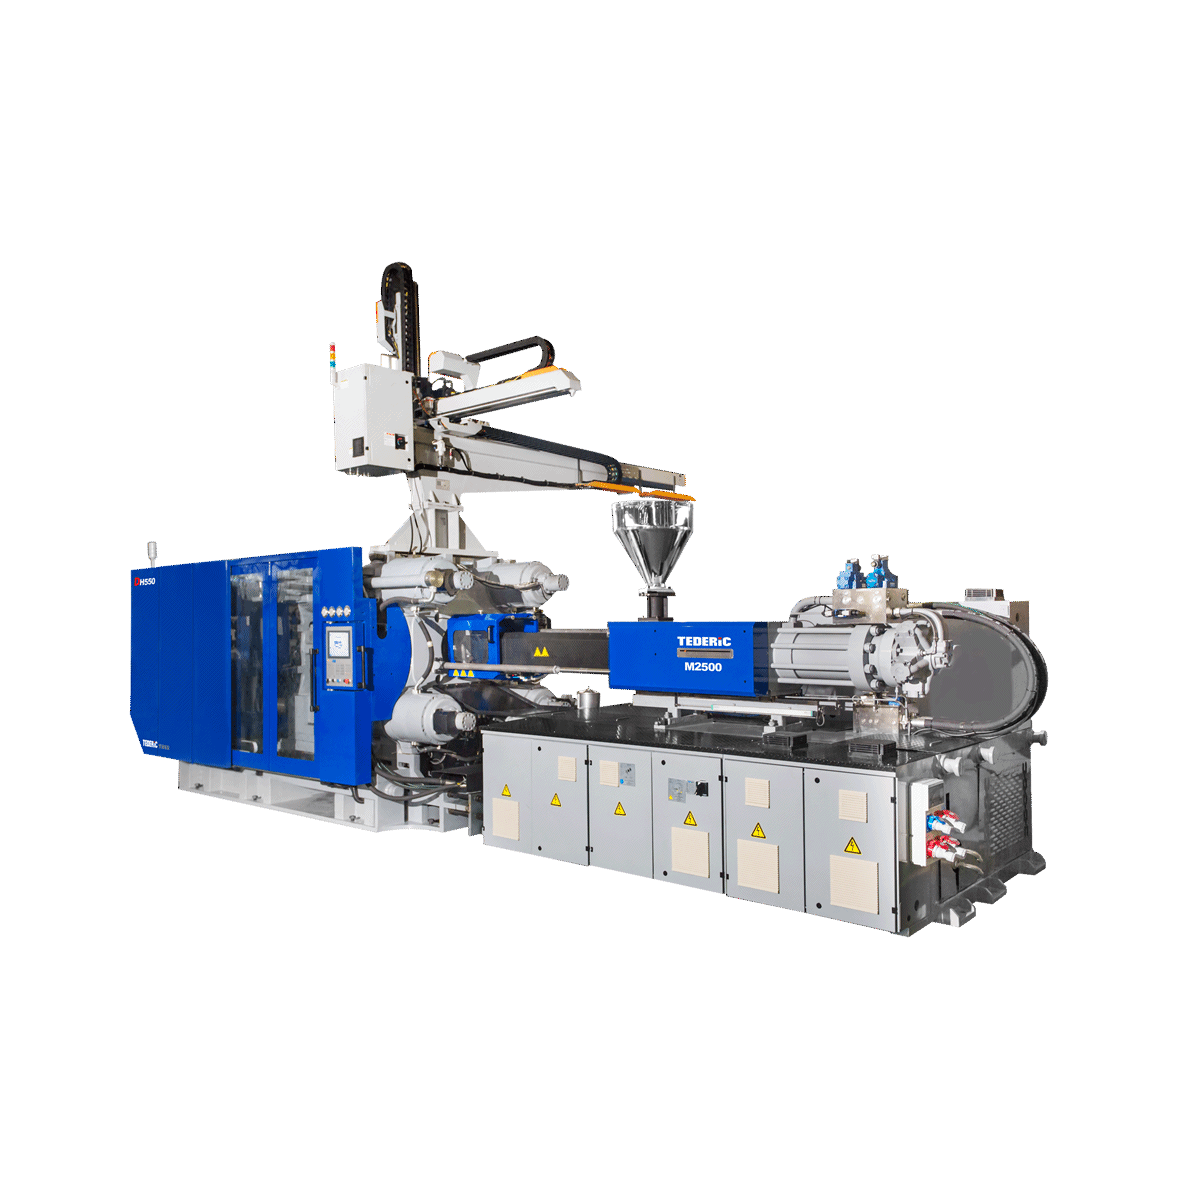 DH-MM & DD-MM series plastic injection molding machine